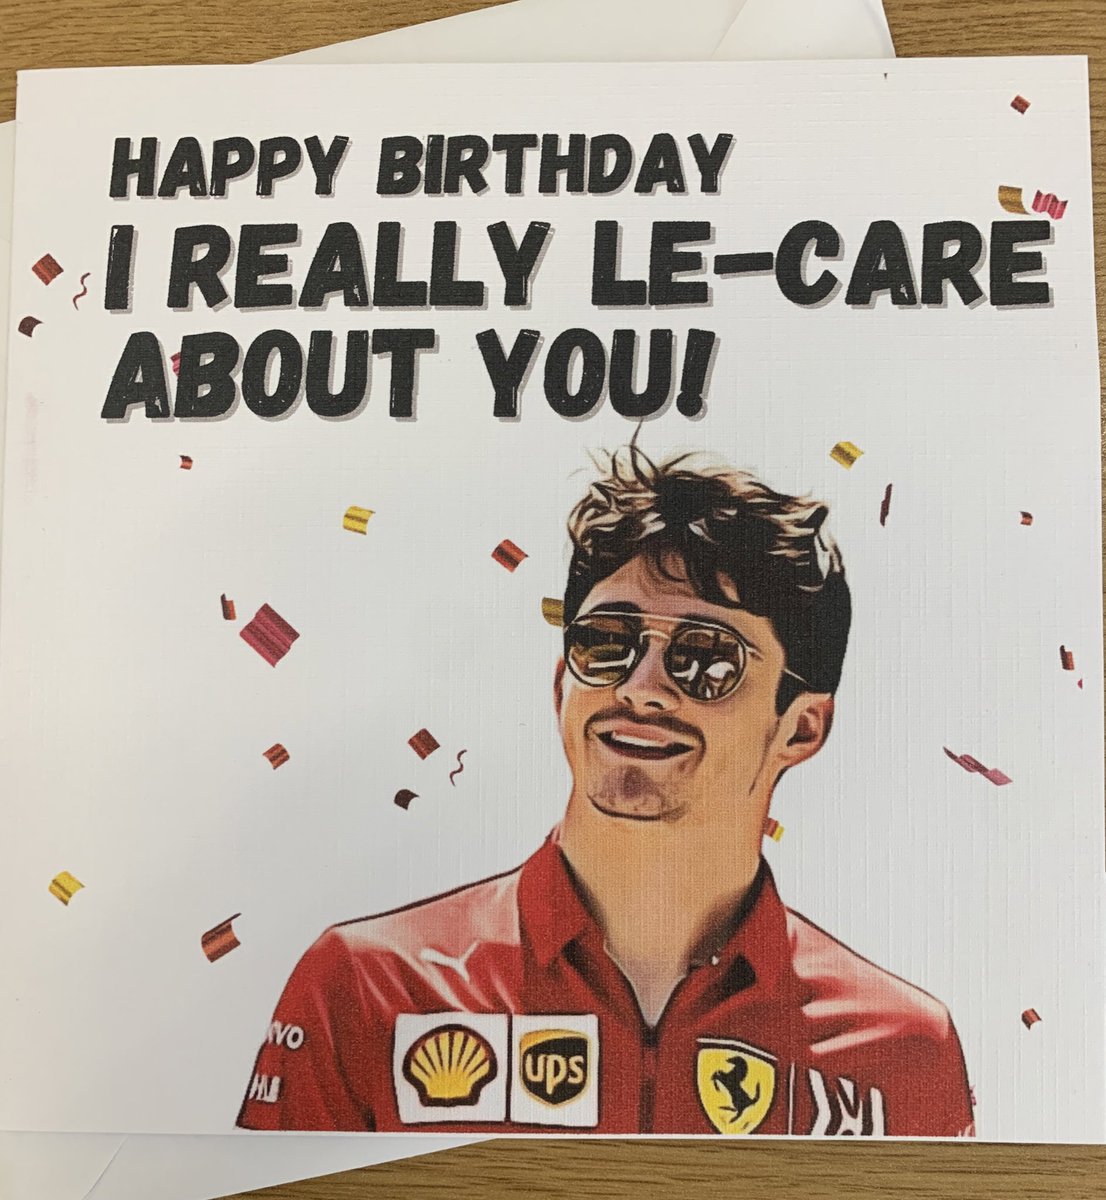 A birthday card I got from my (non f1 fan) friend, I think it made my whole year 😭